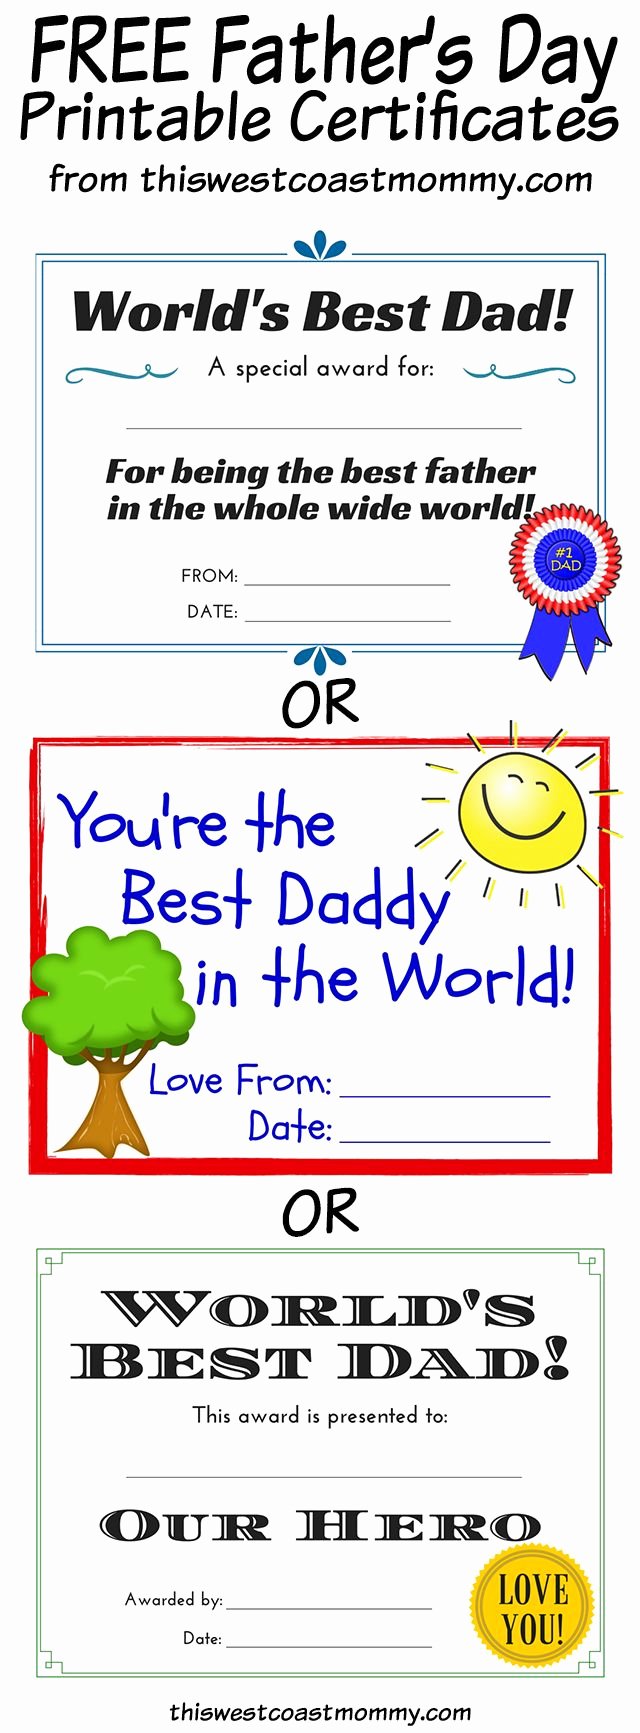 Best Dad Certificate Free Printable Awesome World S Best Dad 3 Free Printable Certificates for Father